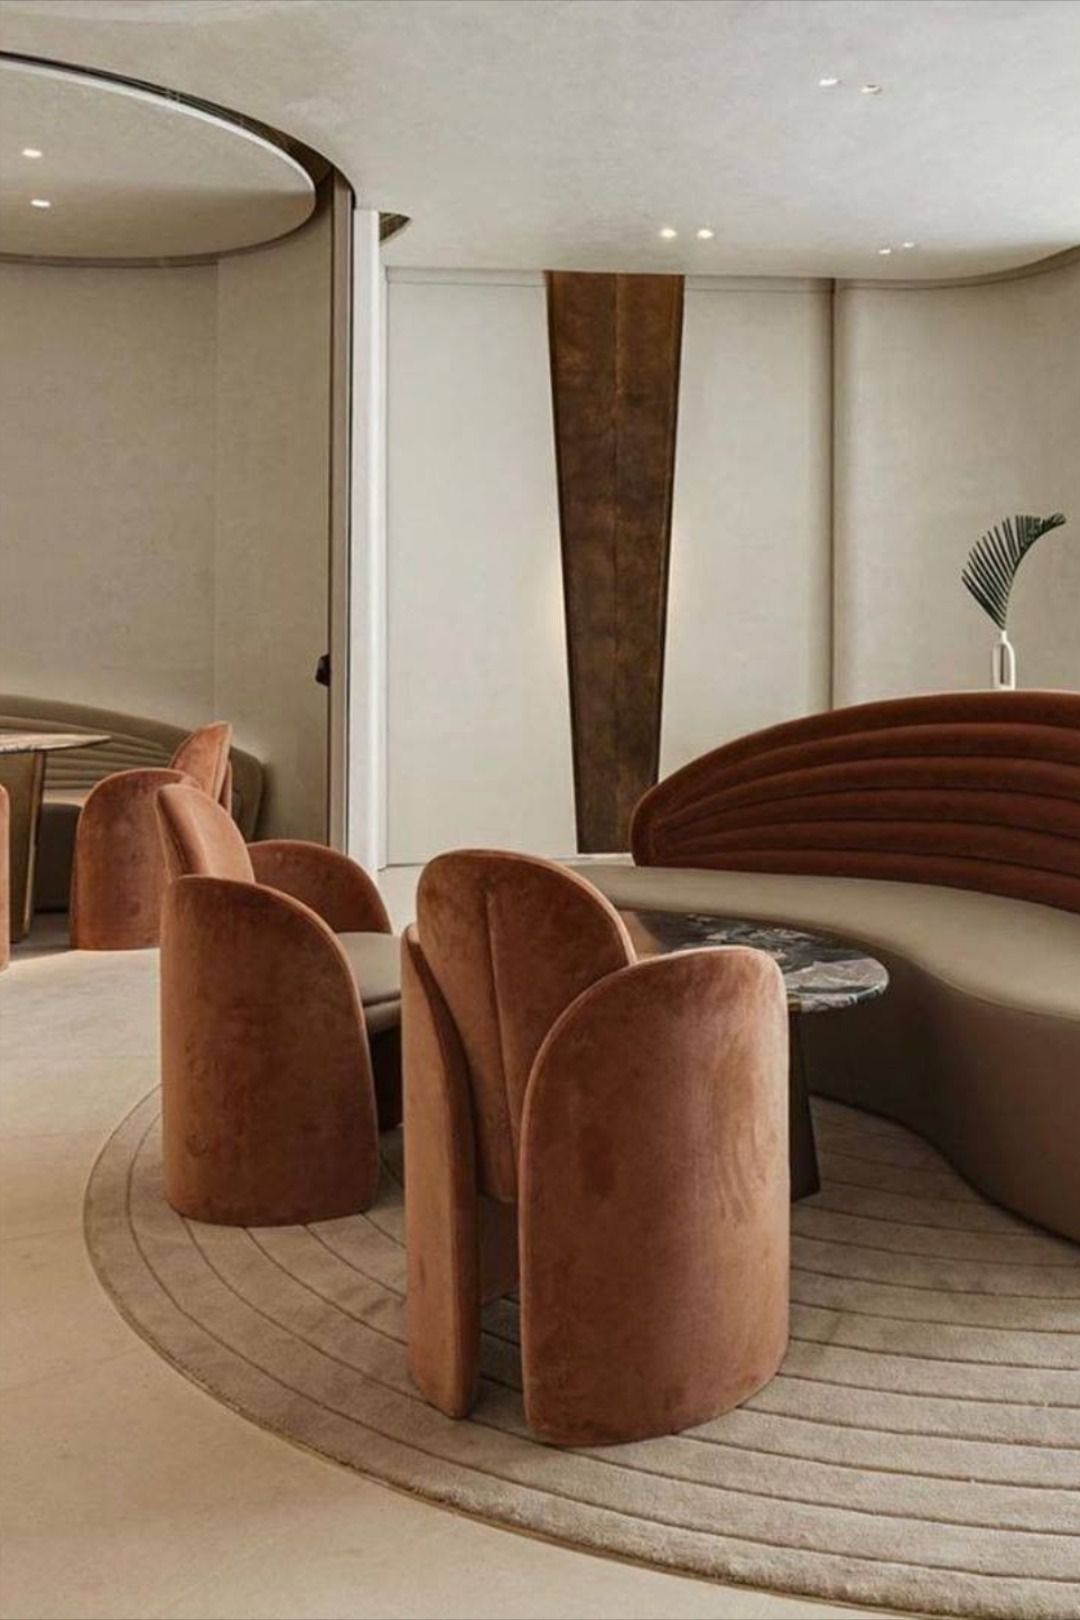 The Top Luxury Furniture Brands Every Homeowner Should Know About